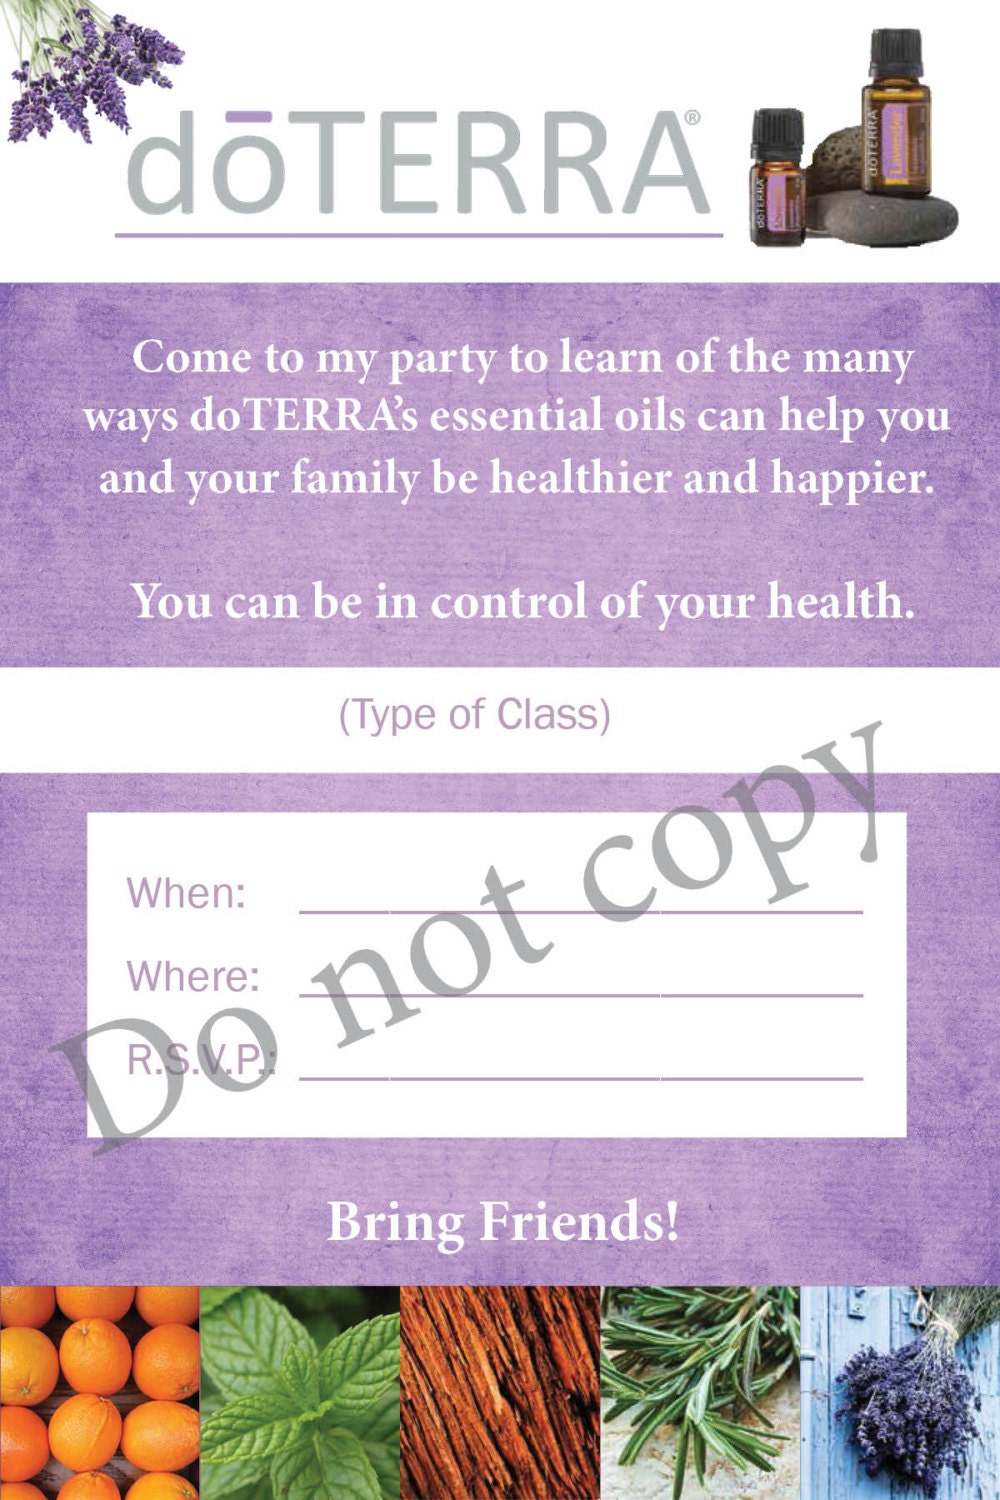 doterra-class-invitation-by-mcmillandesign-on-etsy